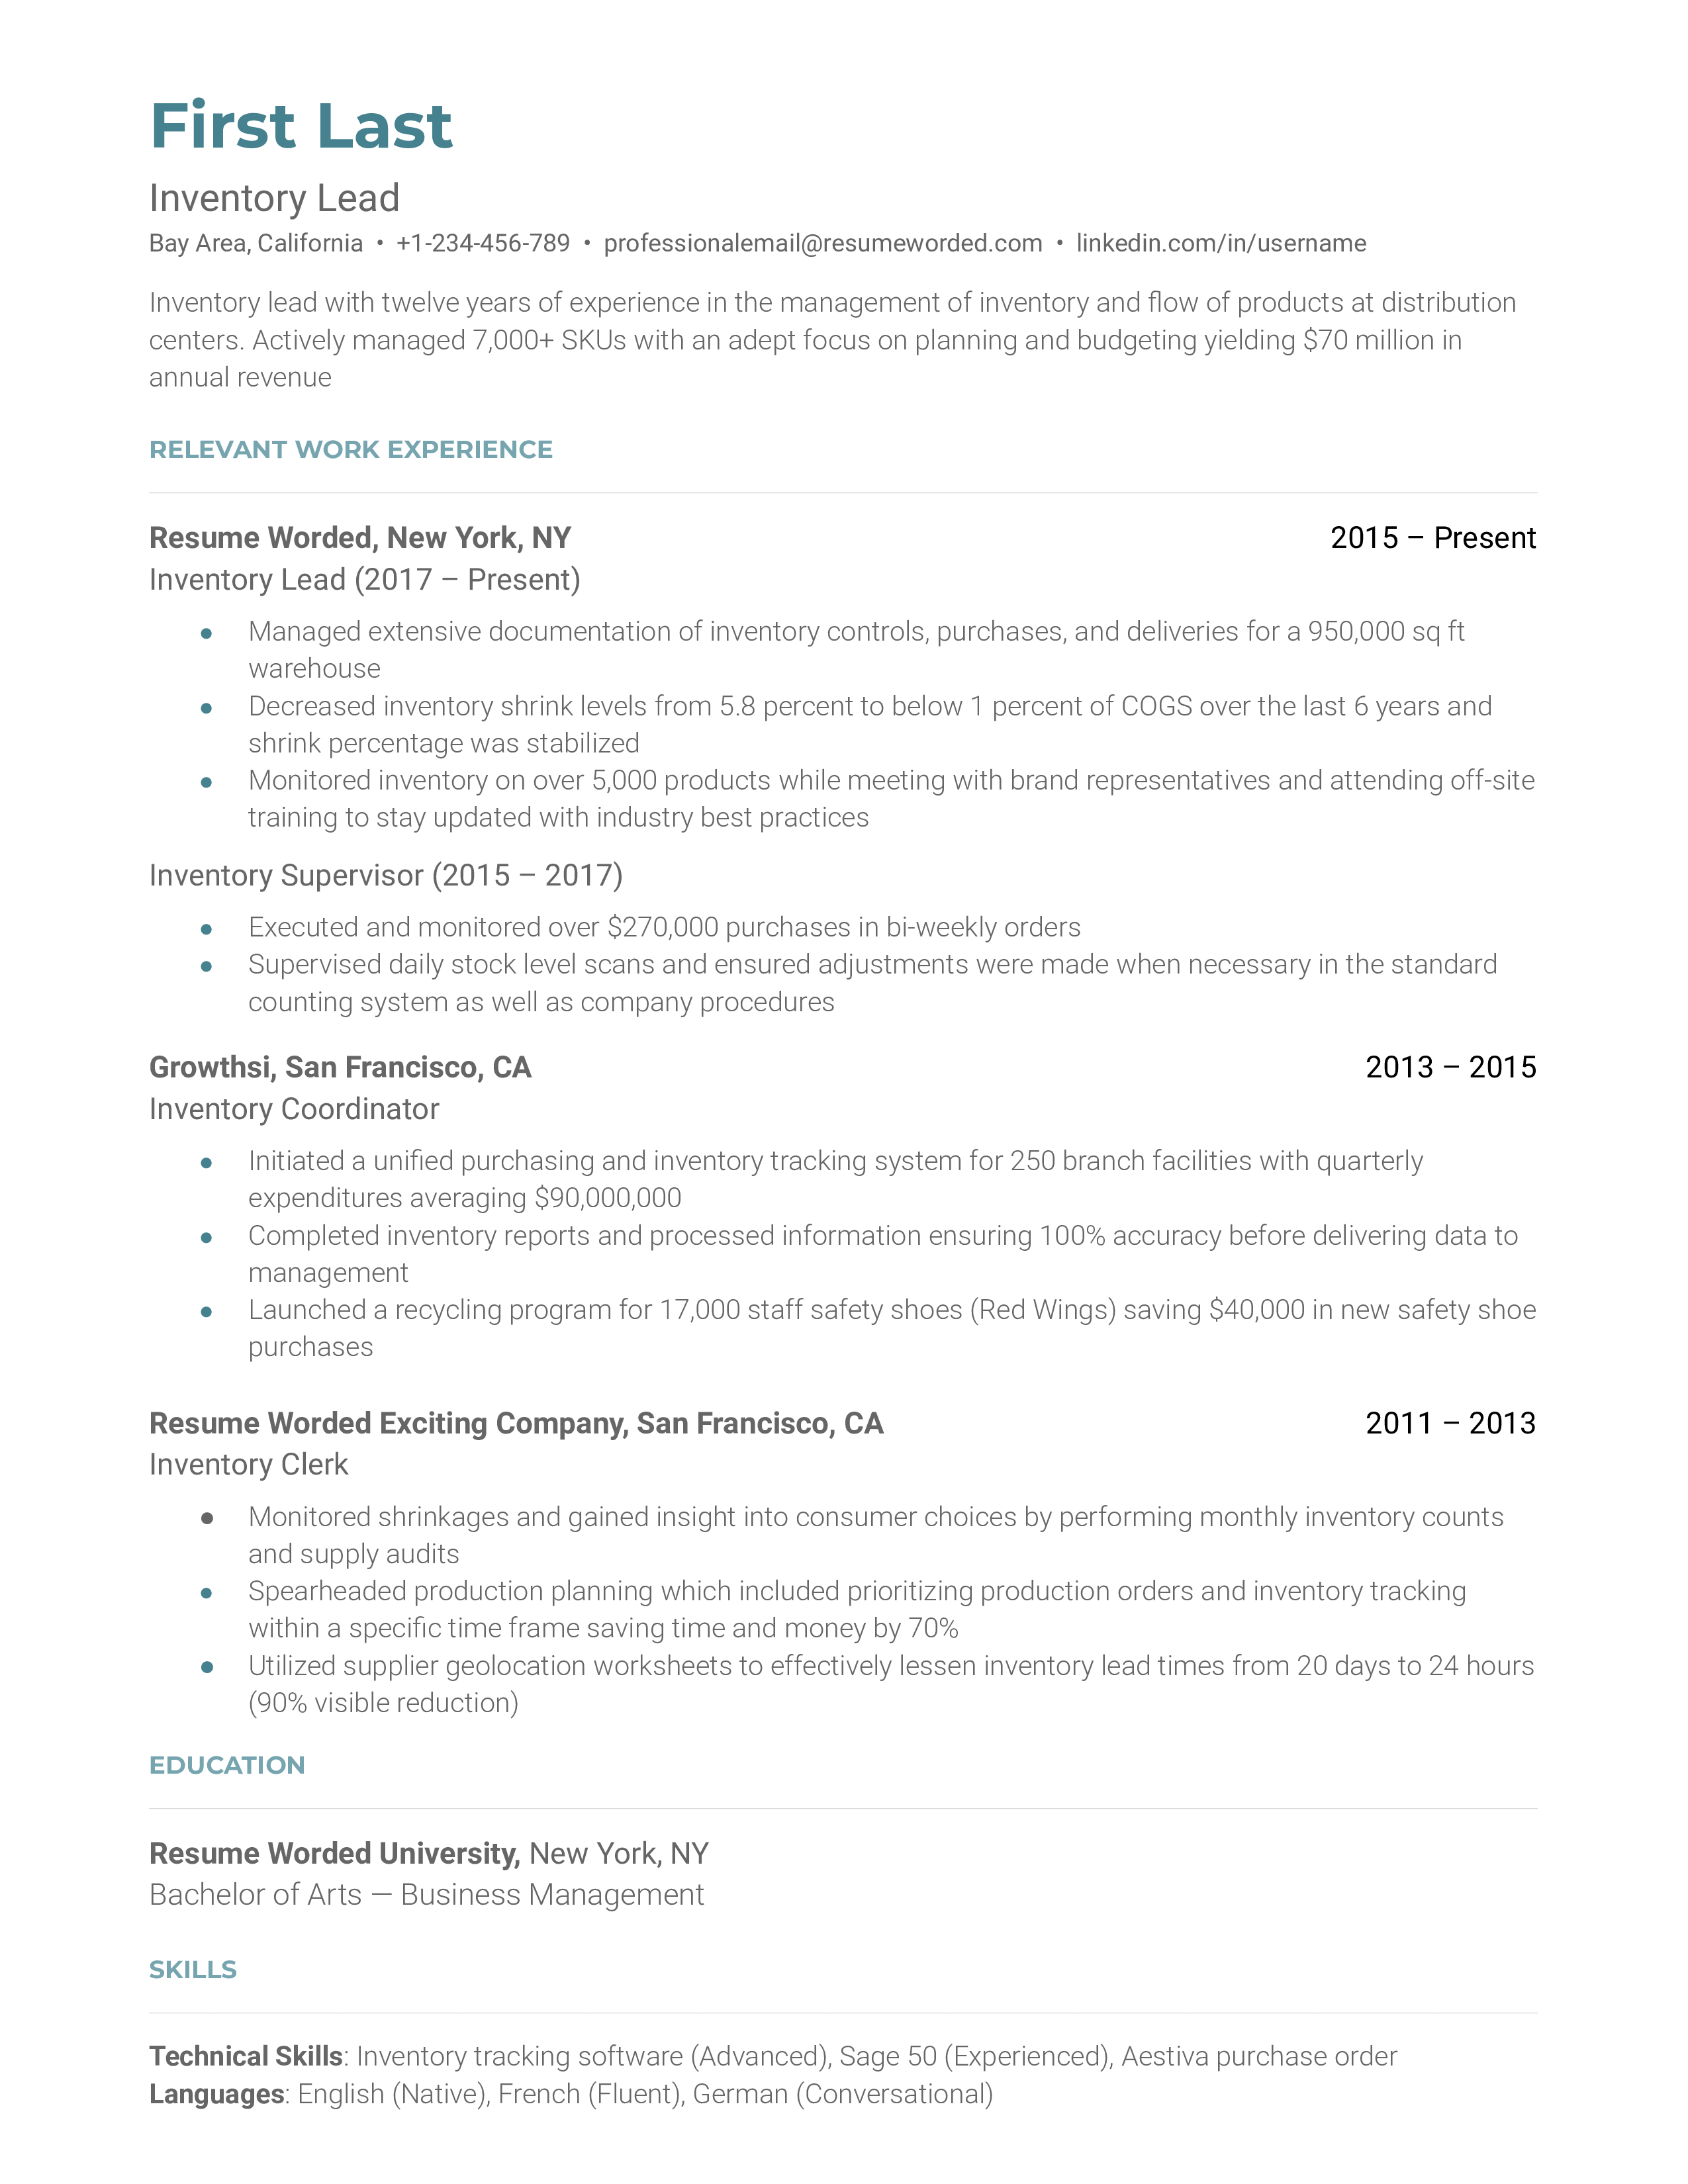 An organized CV for Inventory Lead role showing quantitative achievements and tech skills.